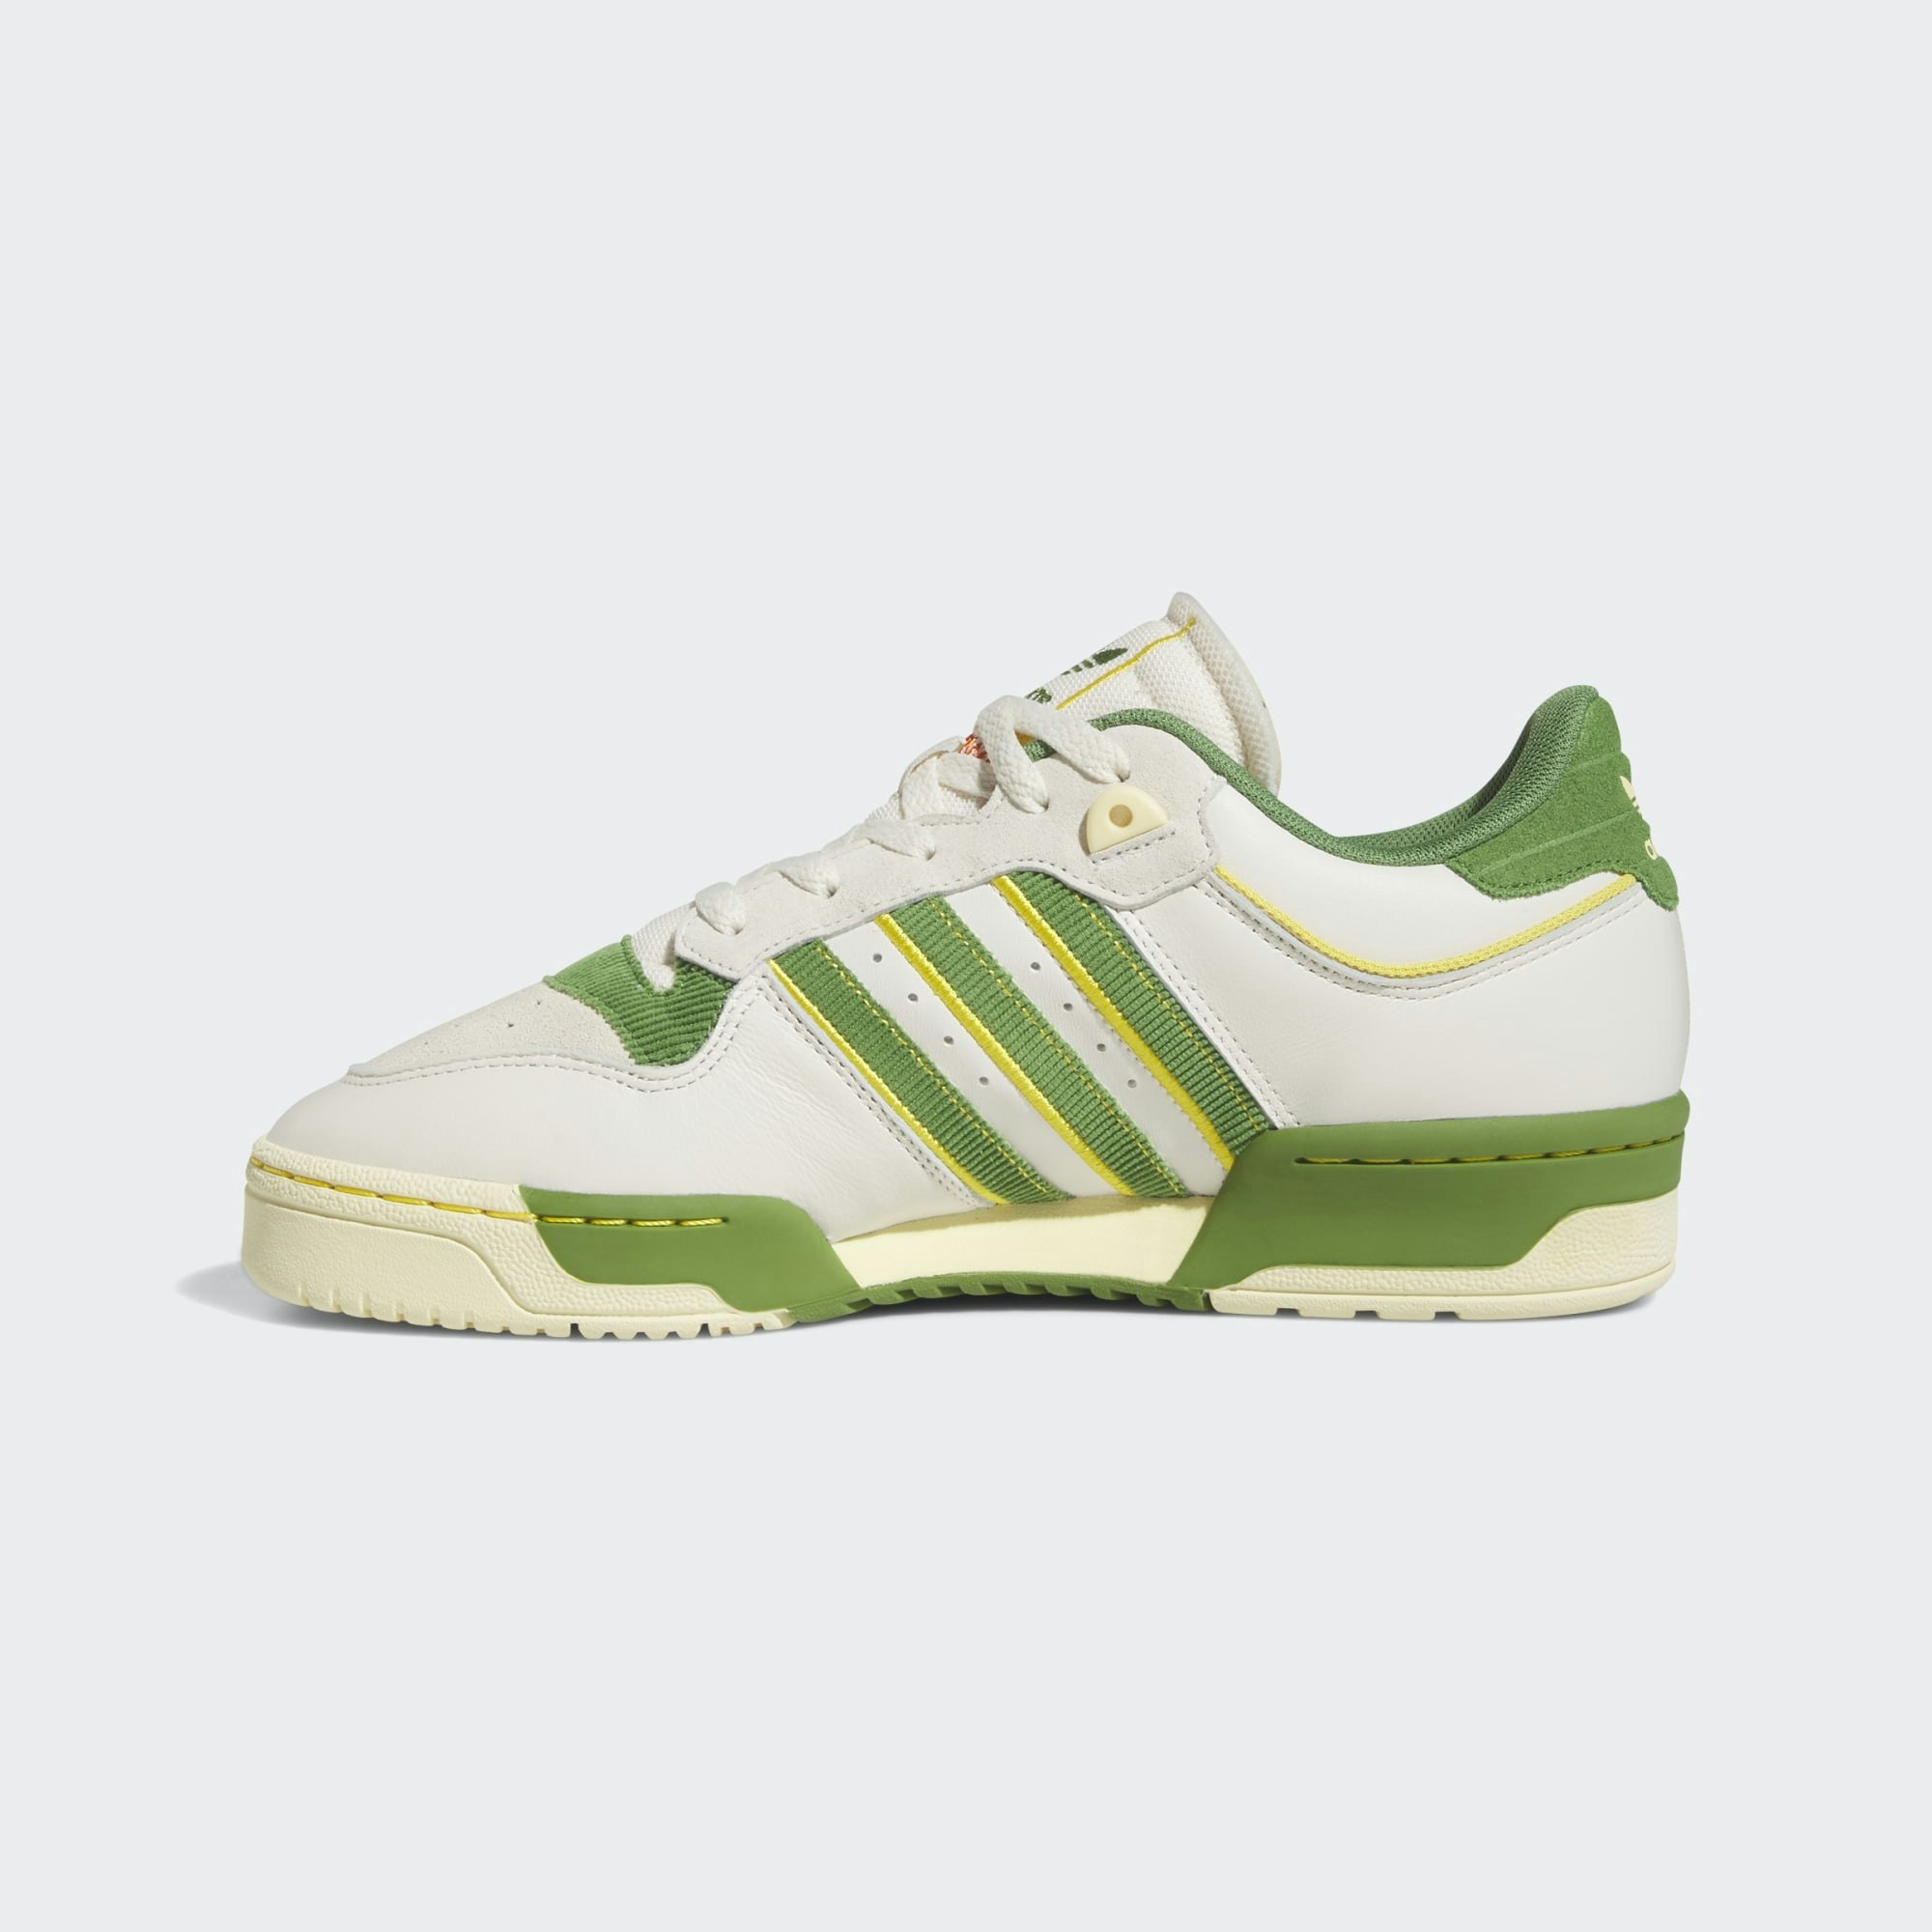 adidas Rivalry 86 Low "Crew Green"